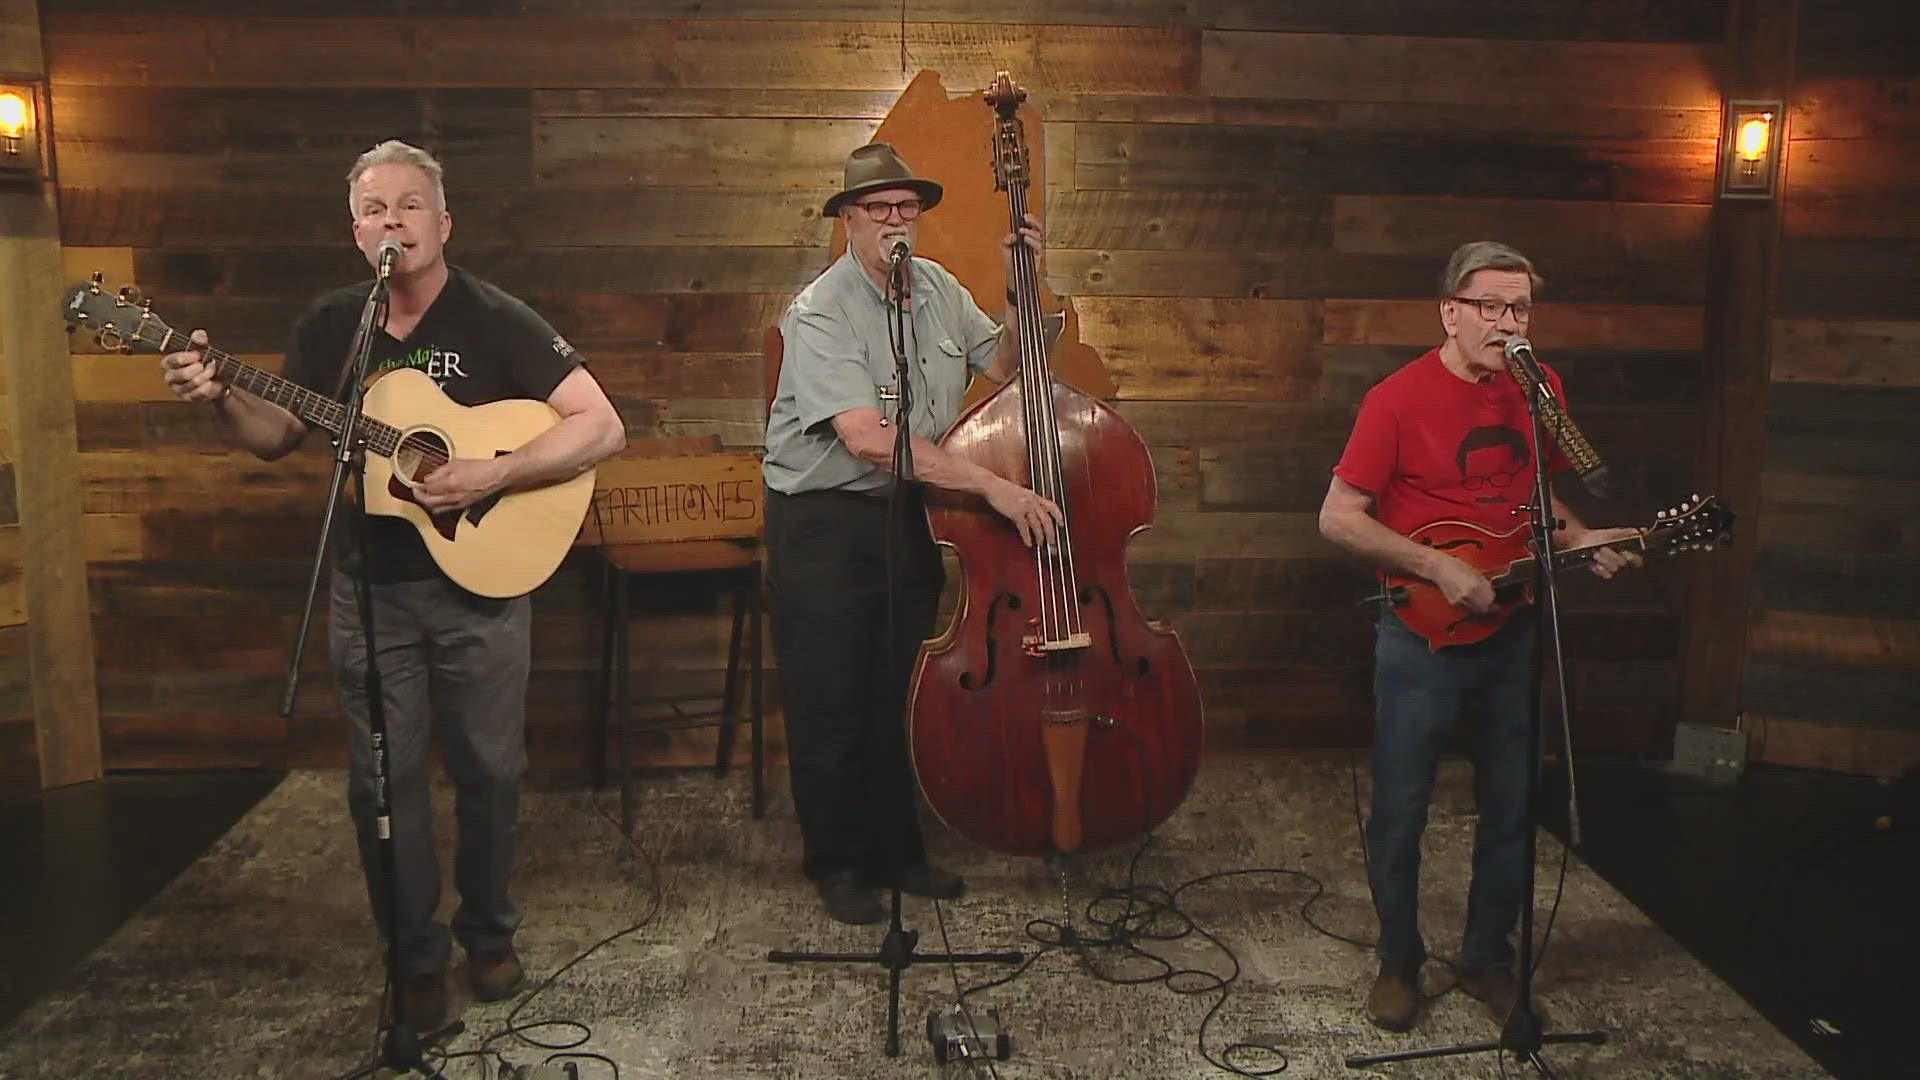 Maine band The Earthtones joined us in the 207 studio to share their music and tell us about some upcoming shows.